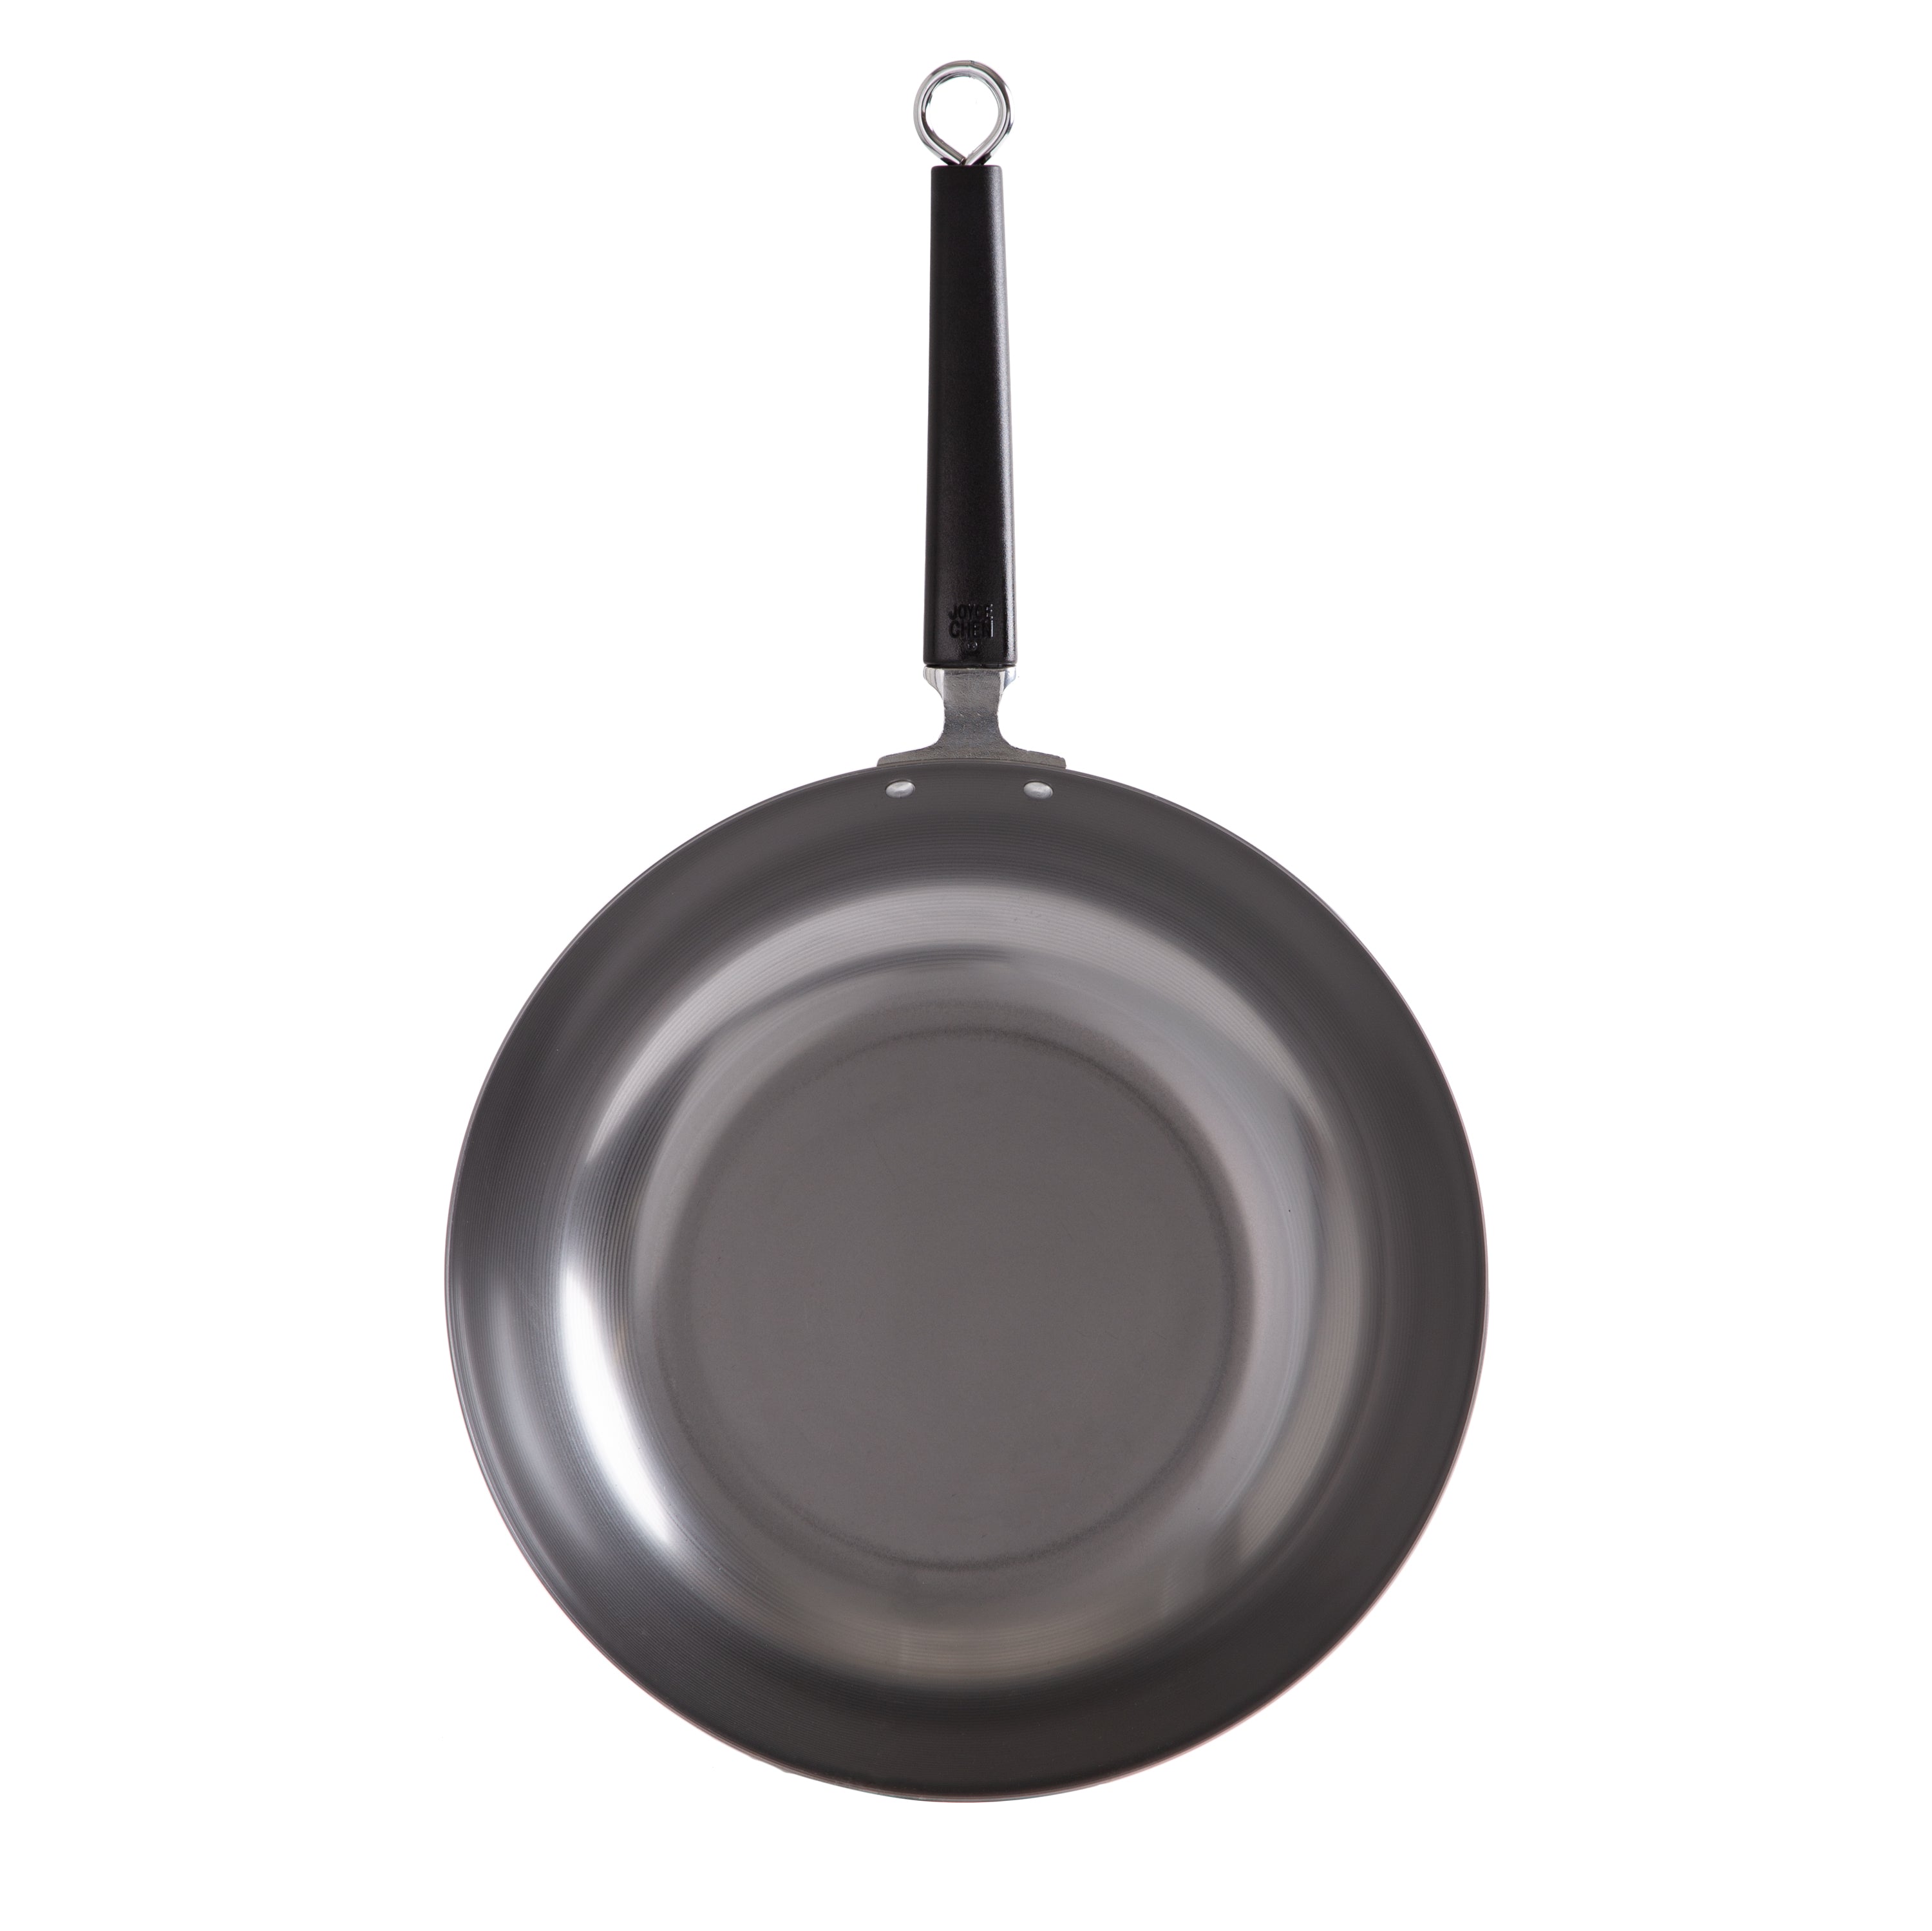 Professional Series 12-Inch Carbon Steel Stir Fry Pan with Phenolic Handle